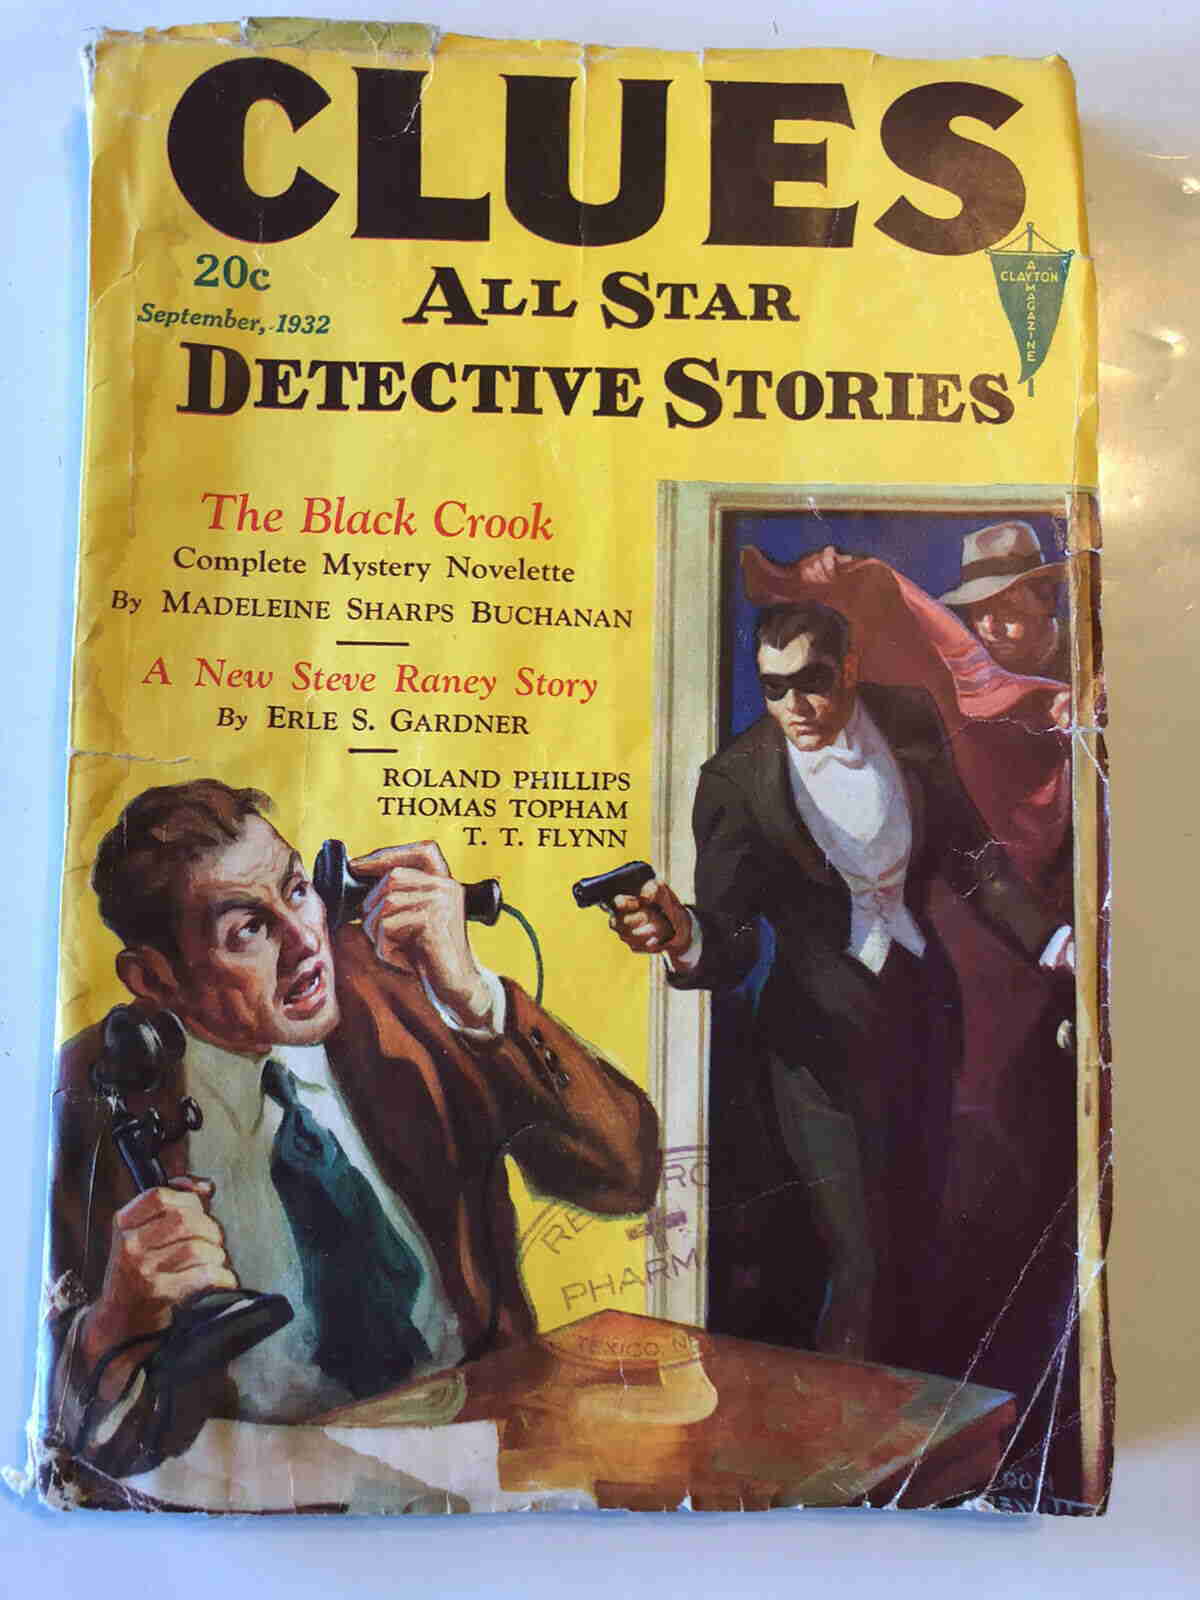 Clues All Star Detective Stories - September 1932